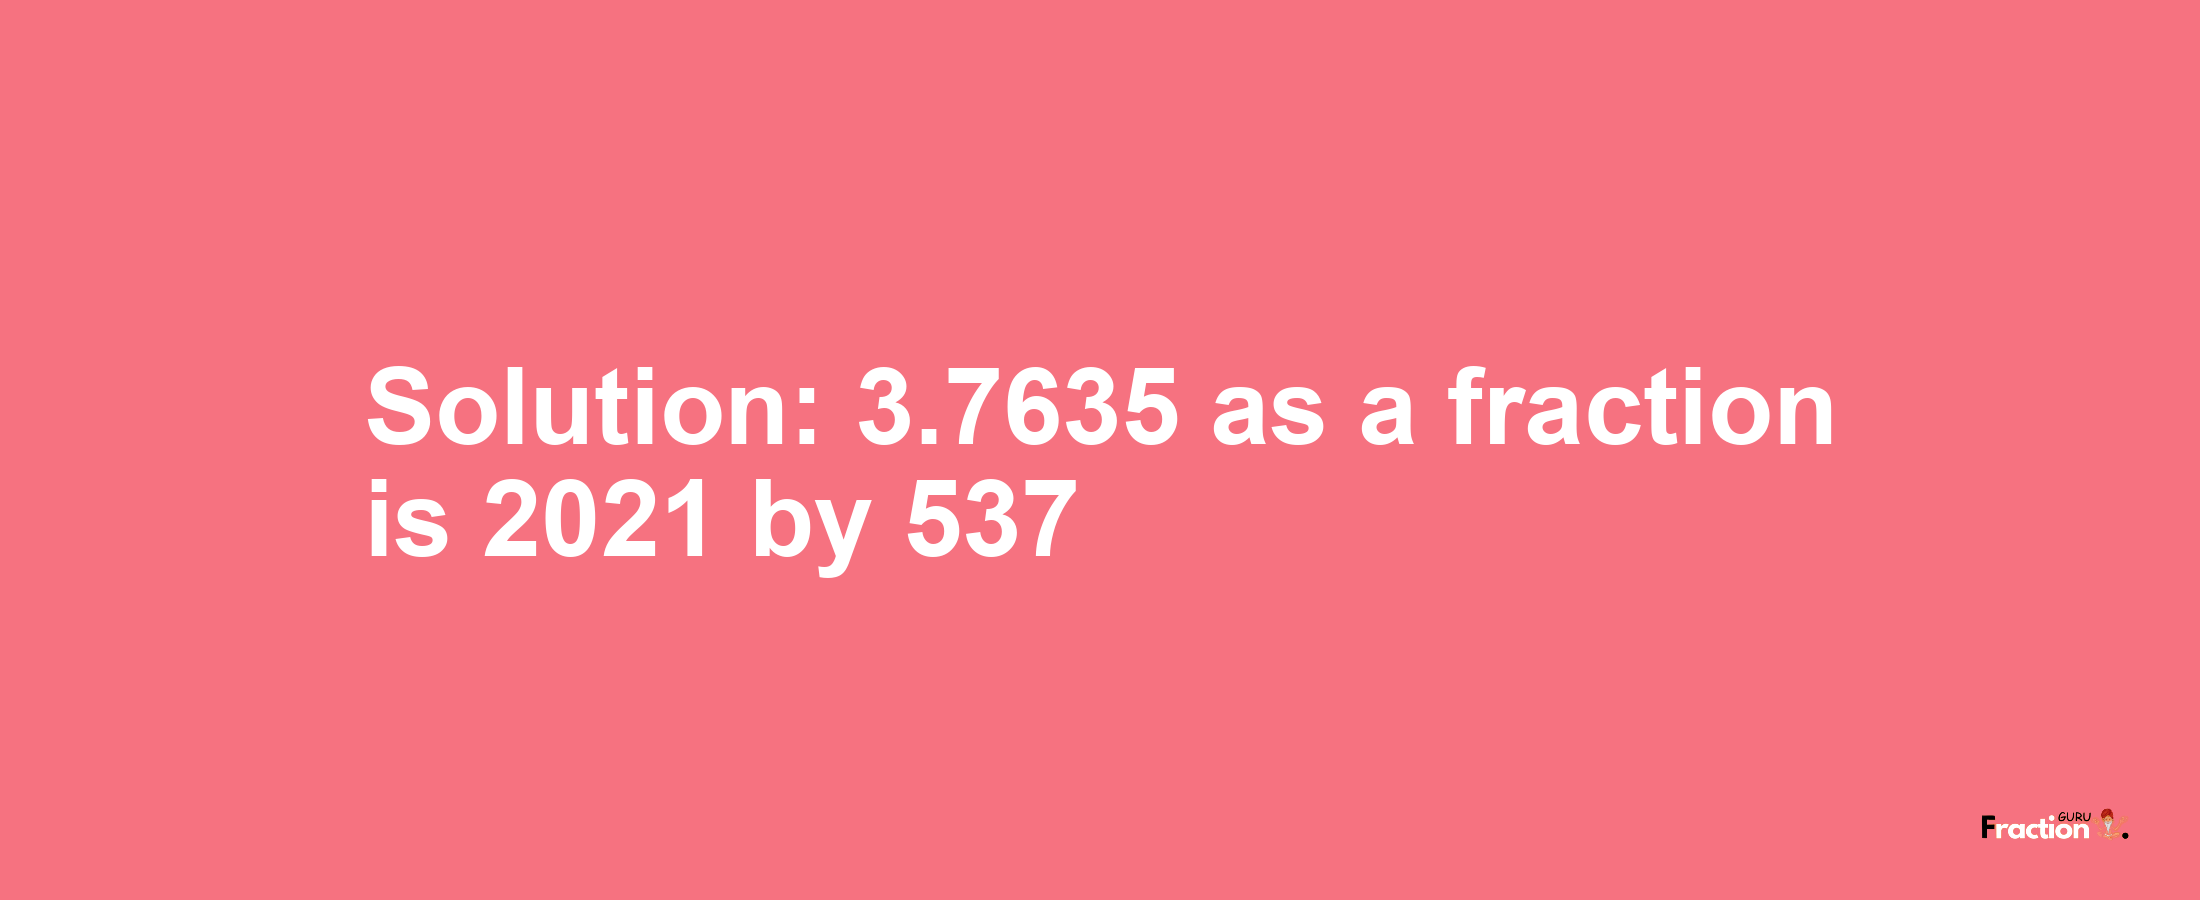 Solution:3.7635 as a fraction is 2021/537